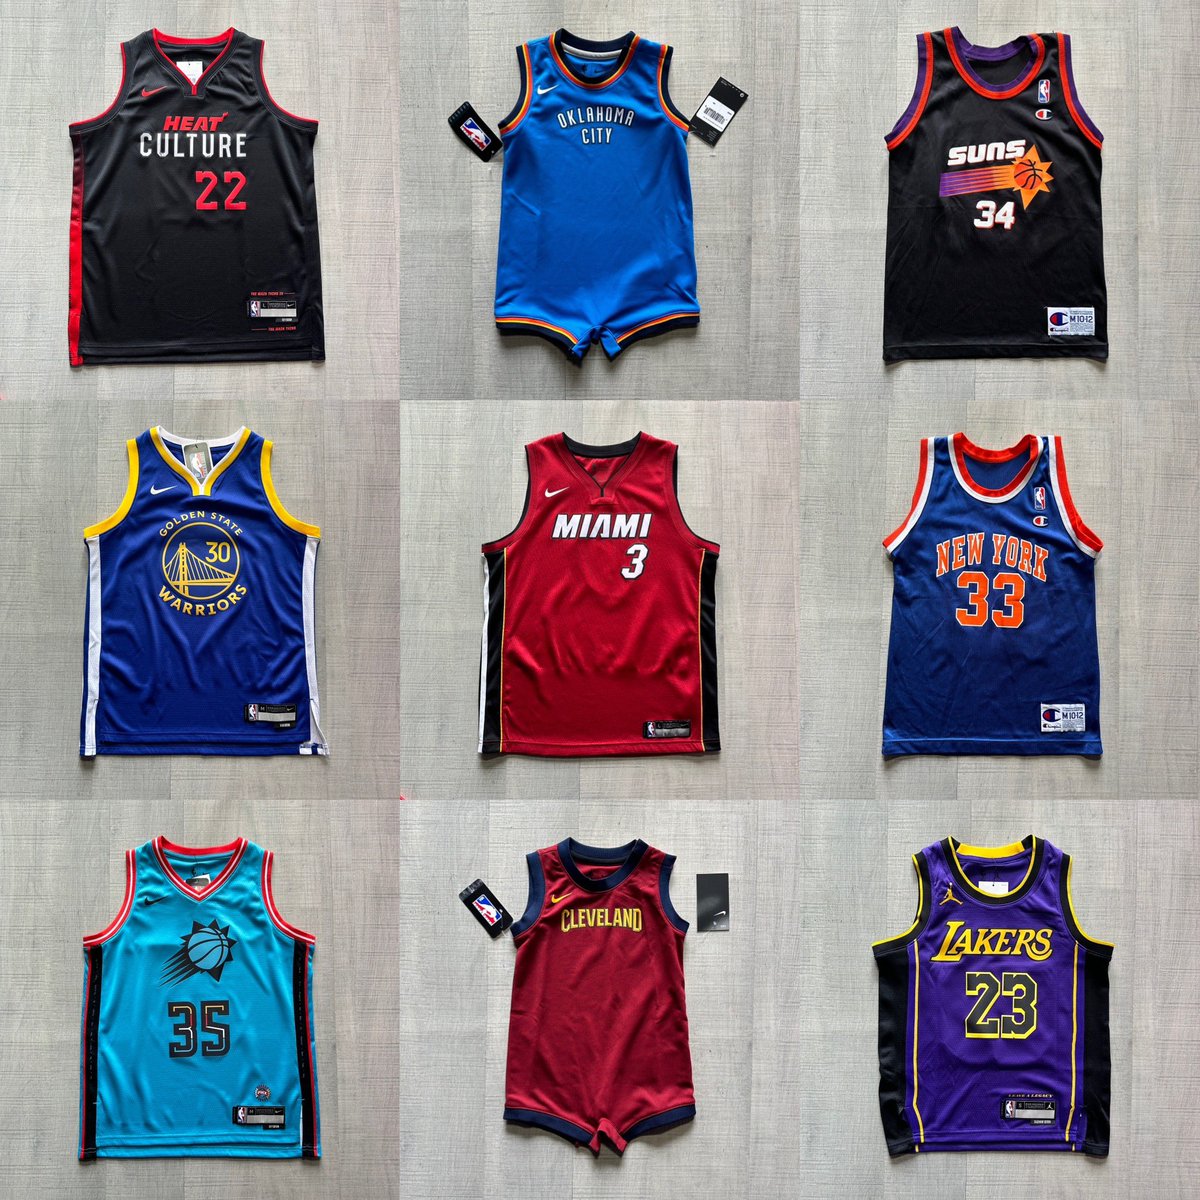 Tonight these kids jerseys all drop on site, and I’ve got over 50 in store. All priced at £39.99 and under. Because jerseys should be affordable, especially kids jerseys. Dropping on site at 7PM